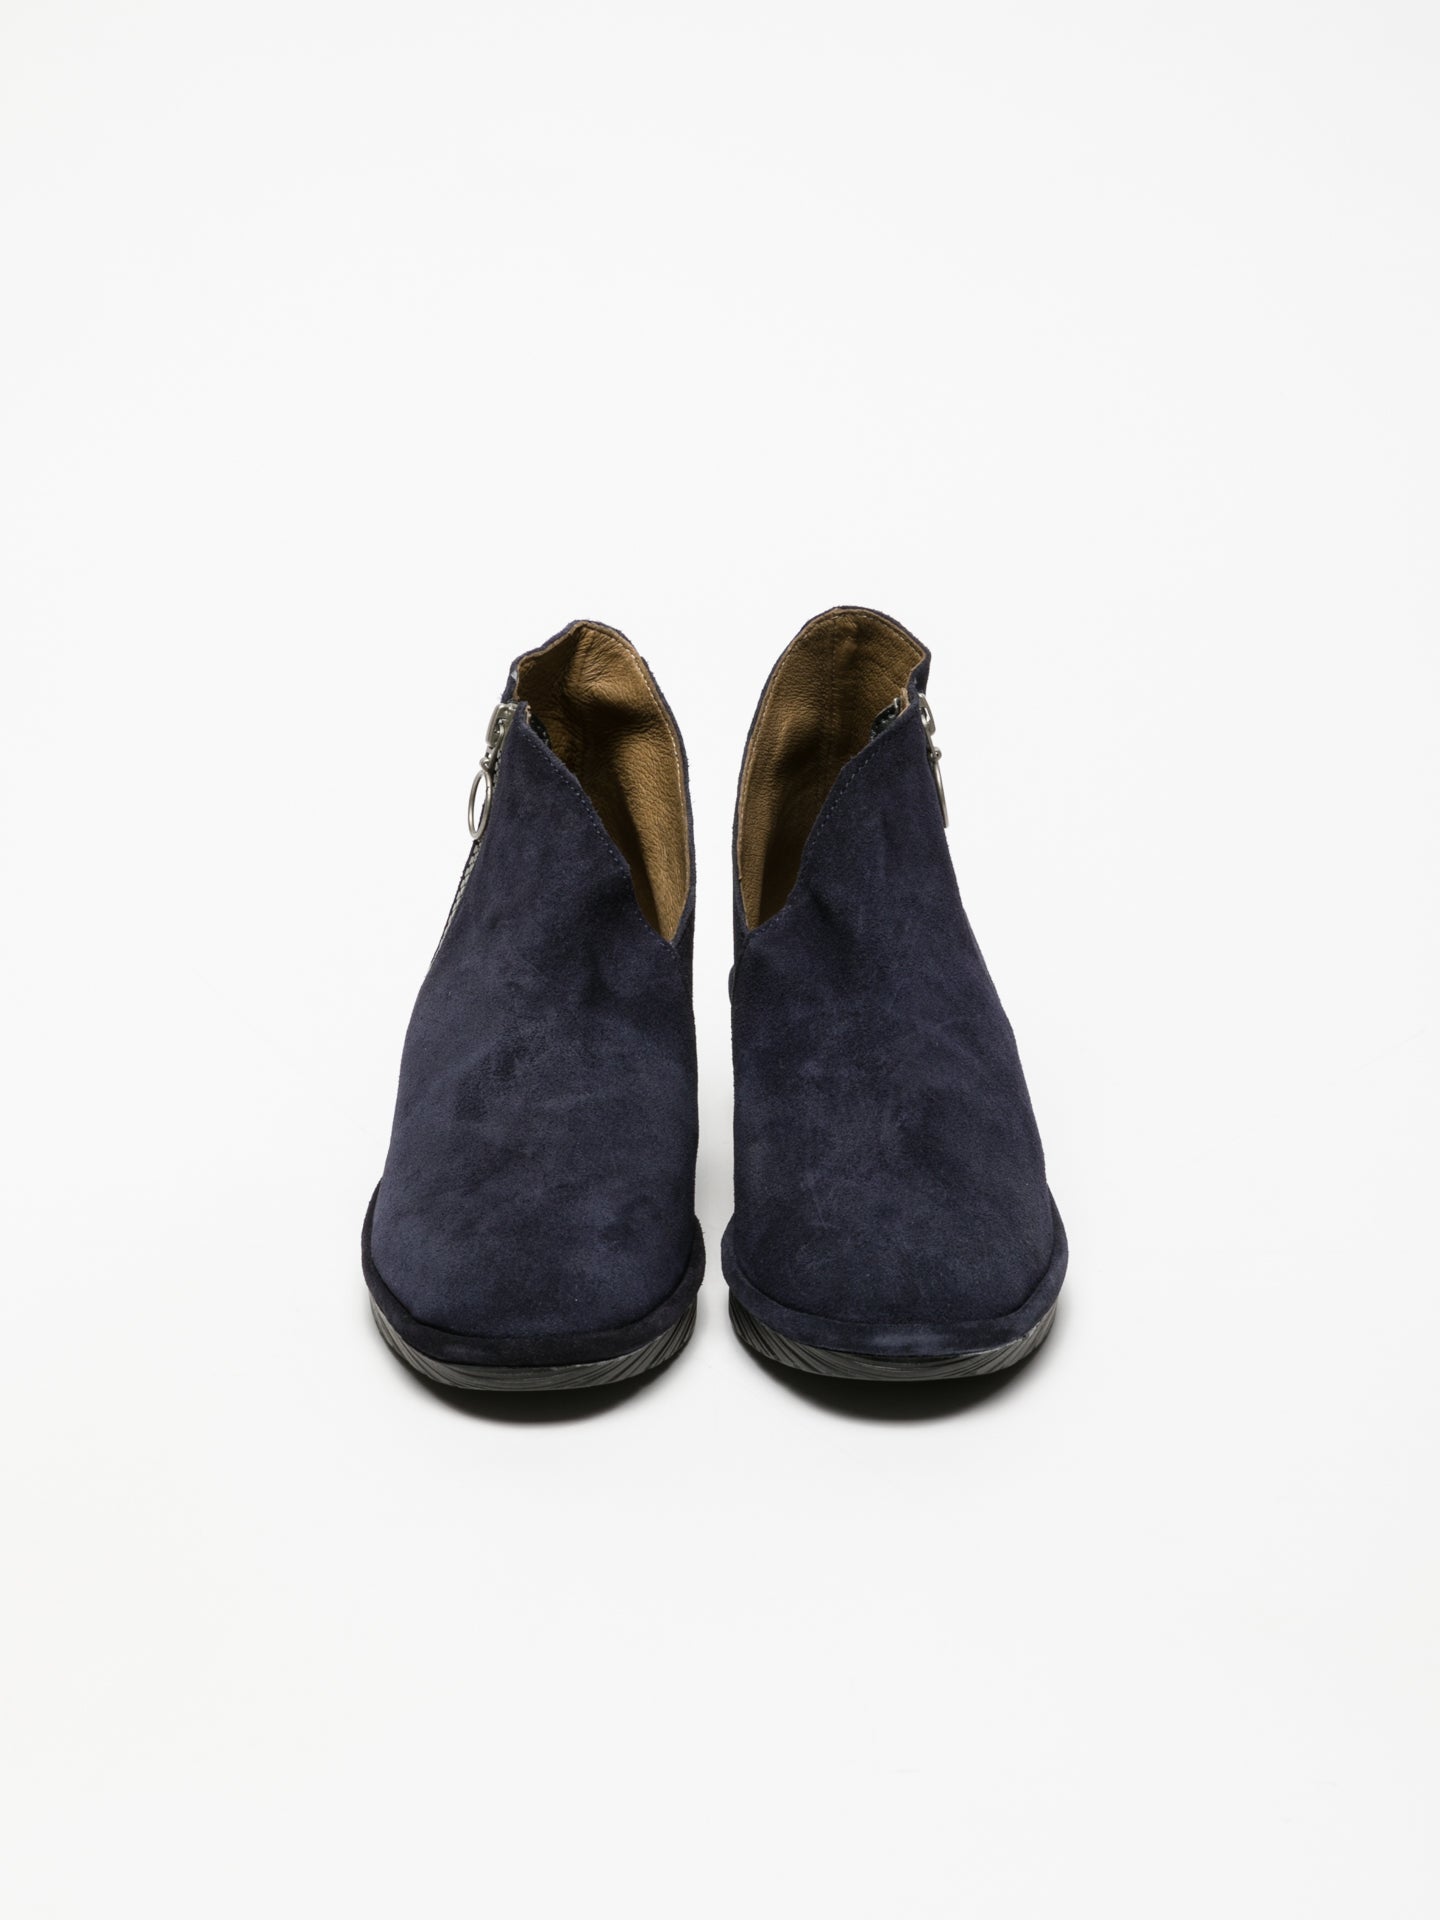 Fly London Navy Zip Up Ankle Boots